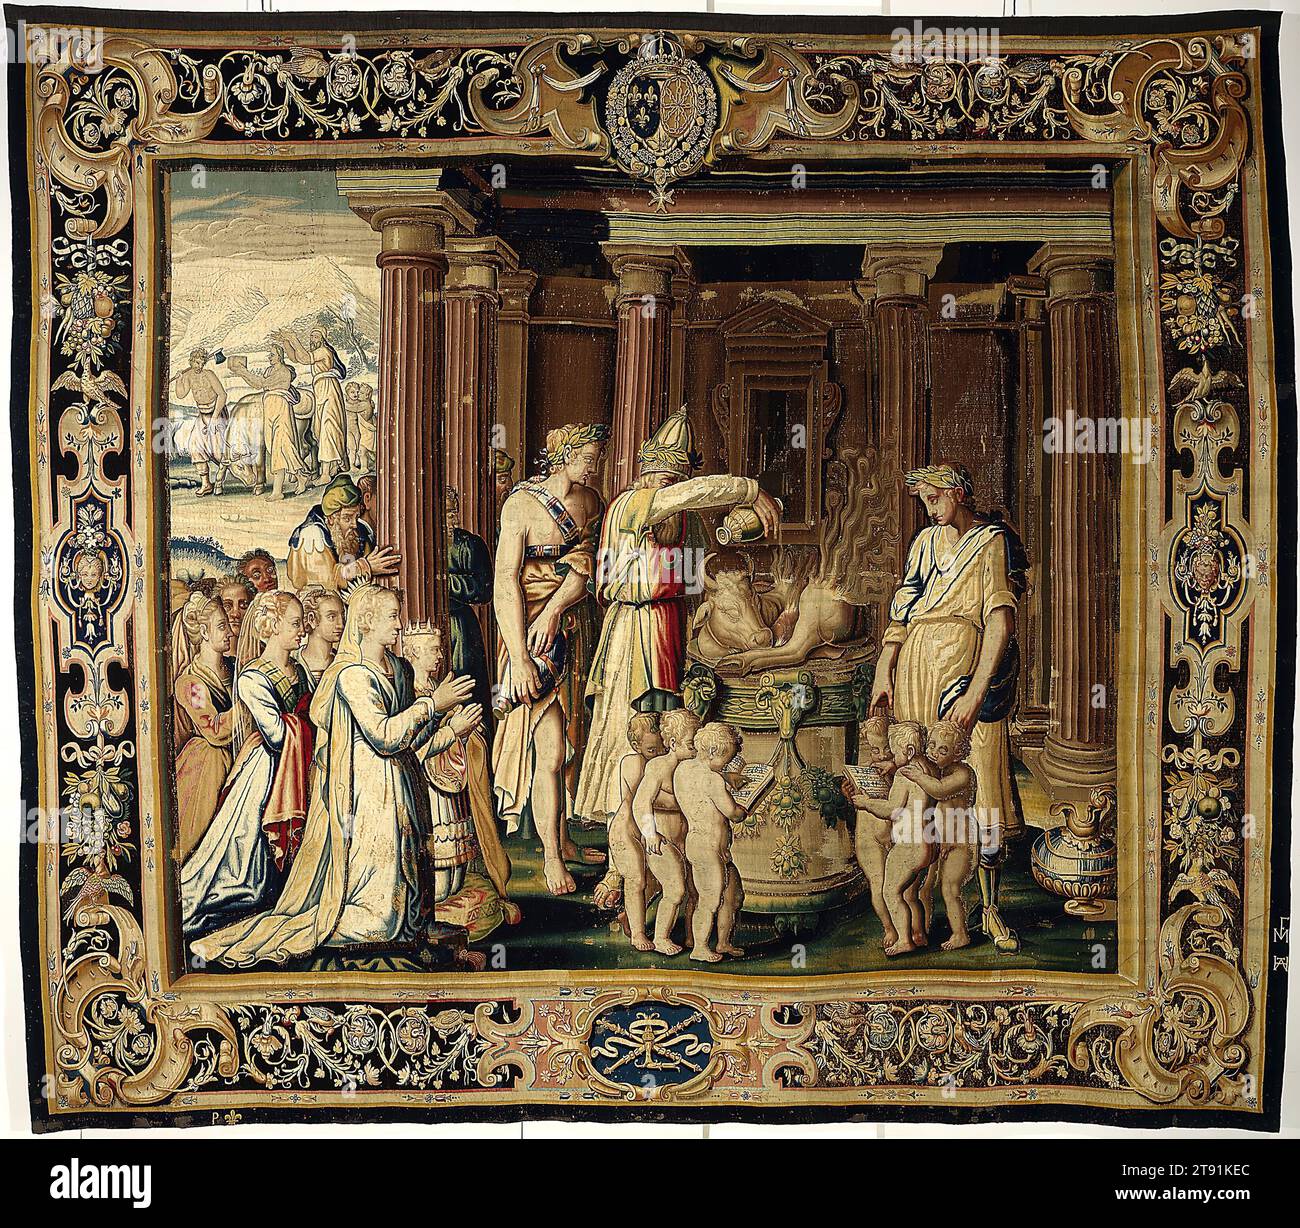 The Coronation Sacrifice, designed c. 1610 (woven 1611–1627), Border design and cartoon probably by Guillaume Dumée and Laurent Guyot; Weaver: Faubourg Saint-Marcel manufactory of Marc de Comans and François de la Planche, H.166 x W.187-3/4 in. (irregular), Wool, silk; tapestry weave, France, 17th century, Queen Artemisia and her son, Lygdamis, kneel before a marble altar asking God's blessing before Lygdamis is crowned king. The high priest pours wine over the sacrificial bull while trios of children sing songs of praise. Behind the queen regent and her son are courtiers and attendants Stock Photo